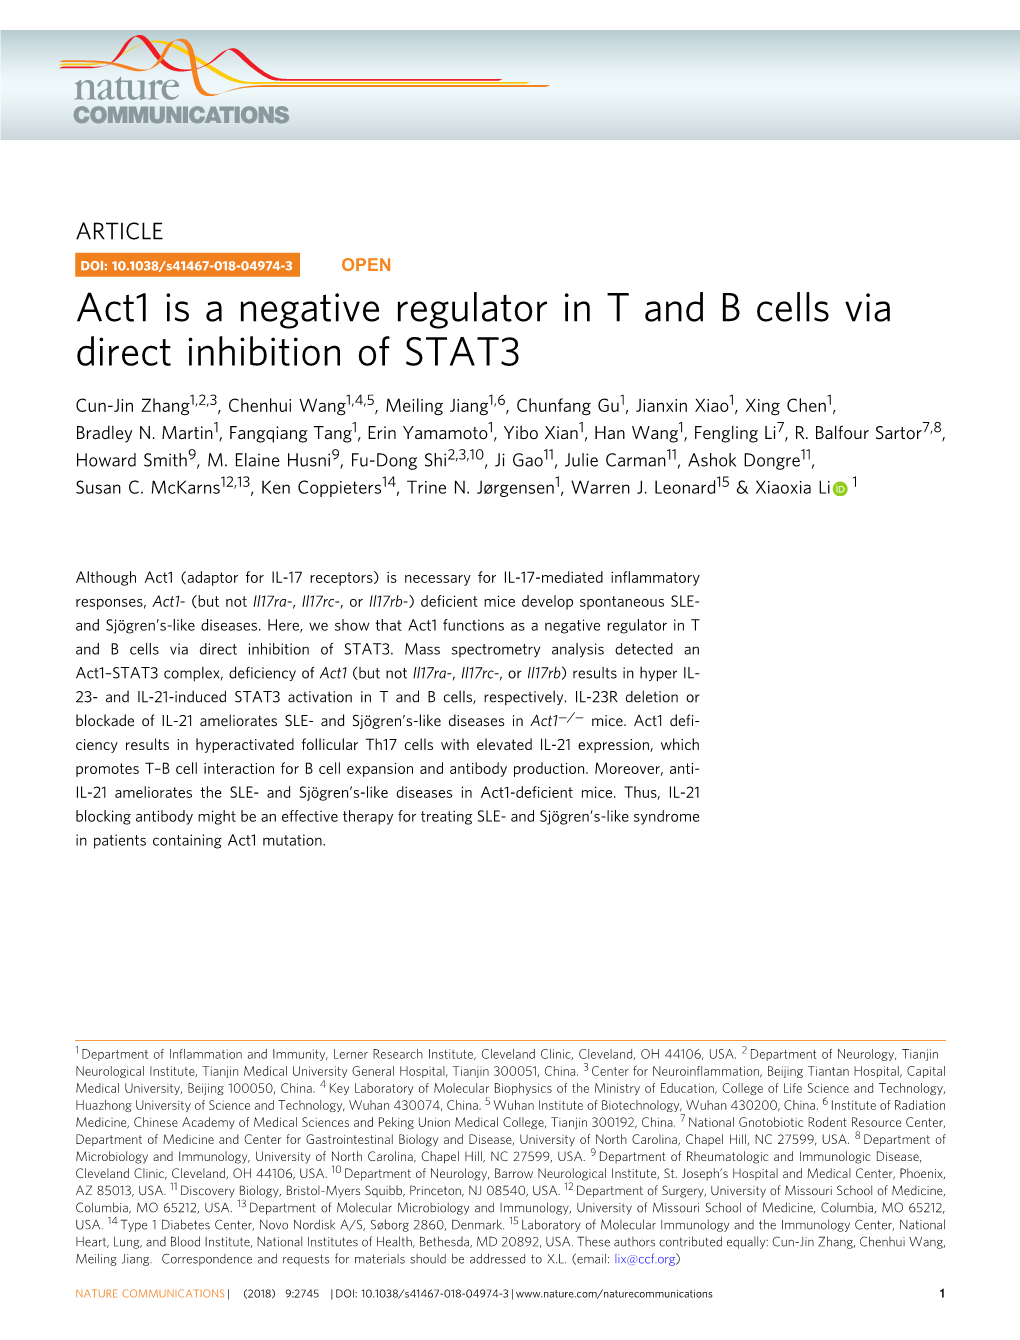 Act1 Is a Negative Regulator in T and B Cells Via Direct Inhibition of STAT3